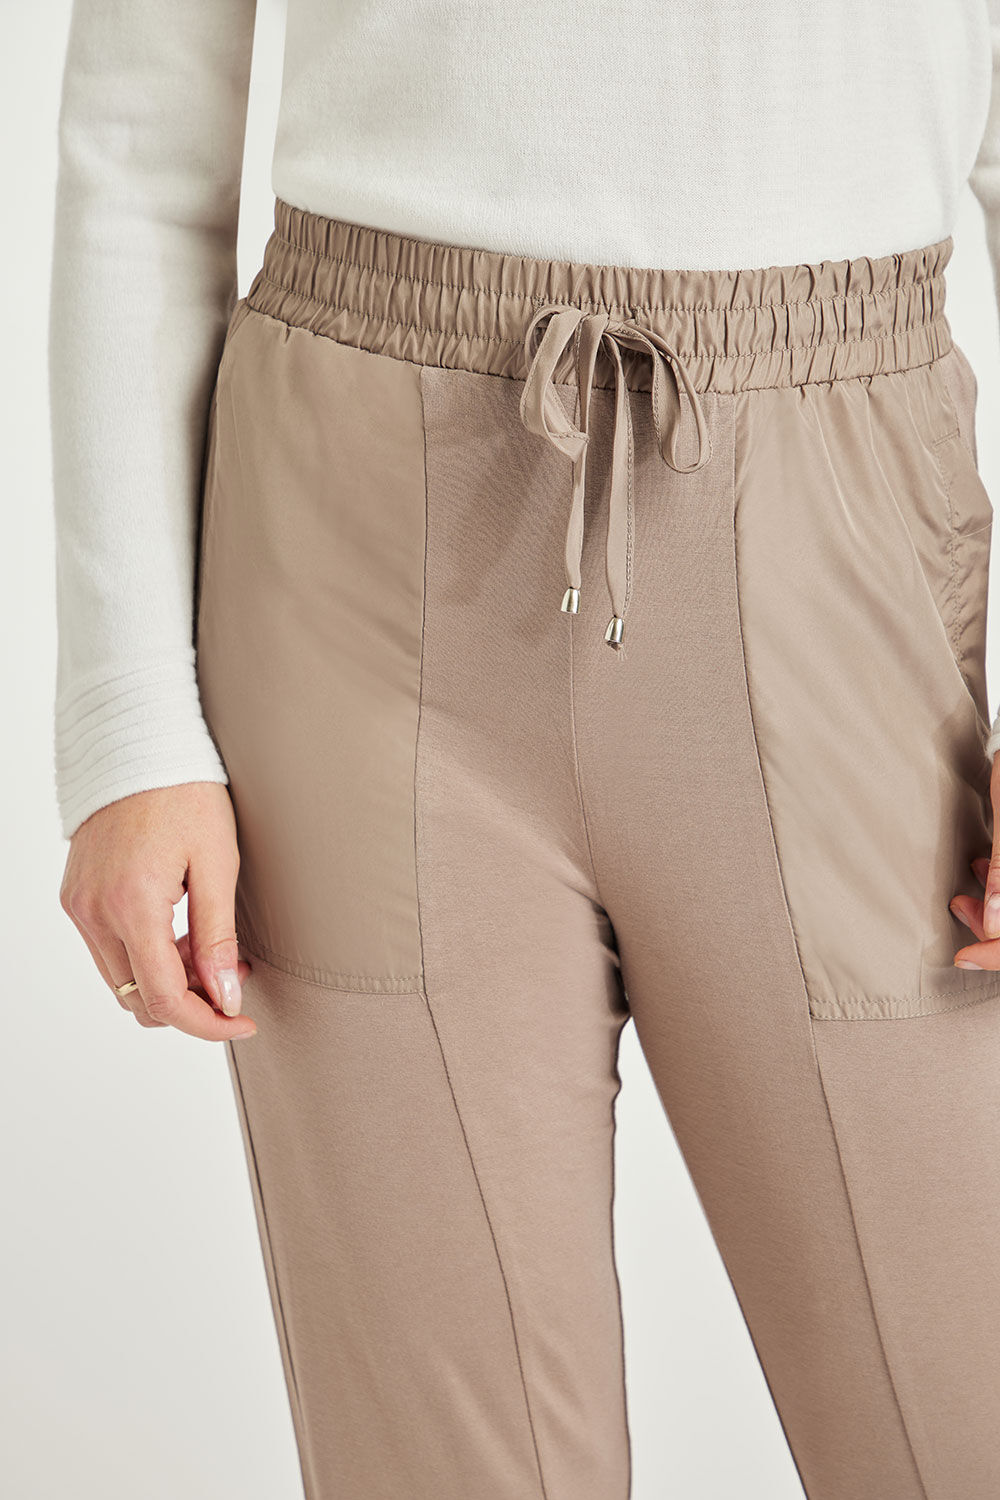 Buy Lipsy Cargo Satin Trim Cuffed Trousers from the Next UK online shop